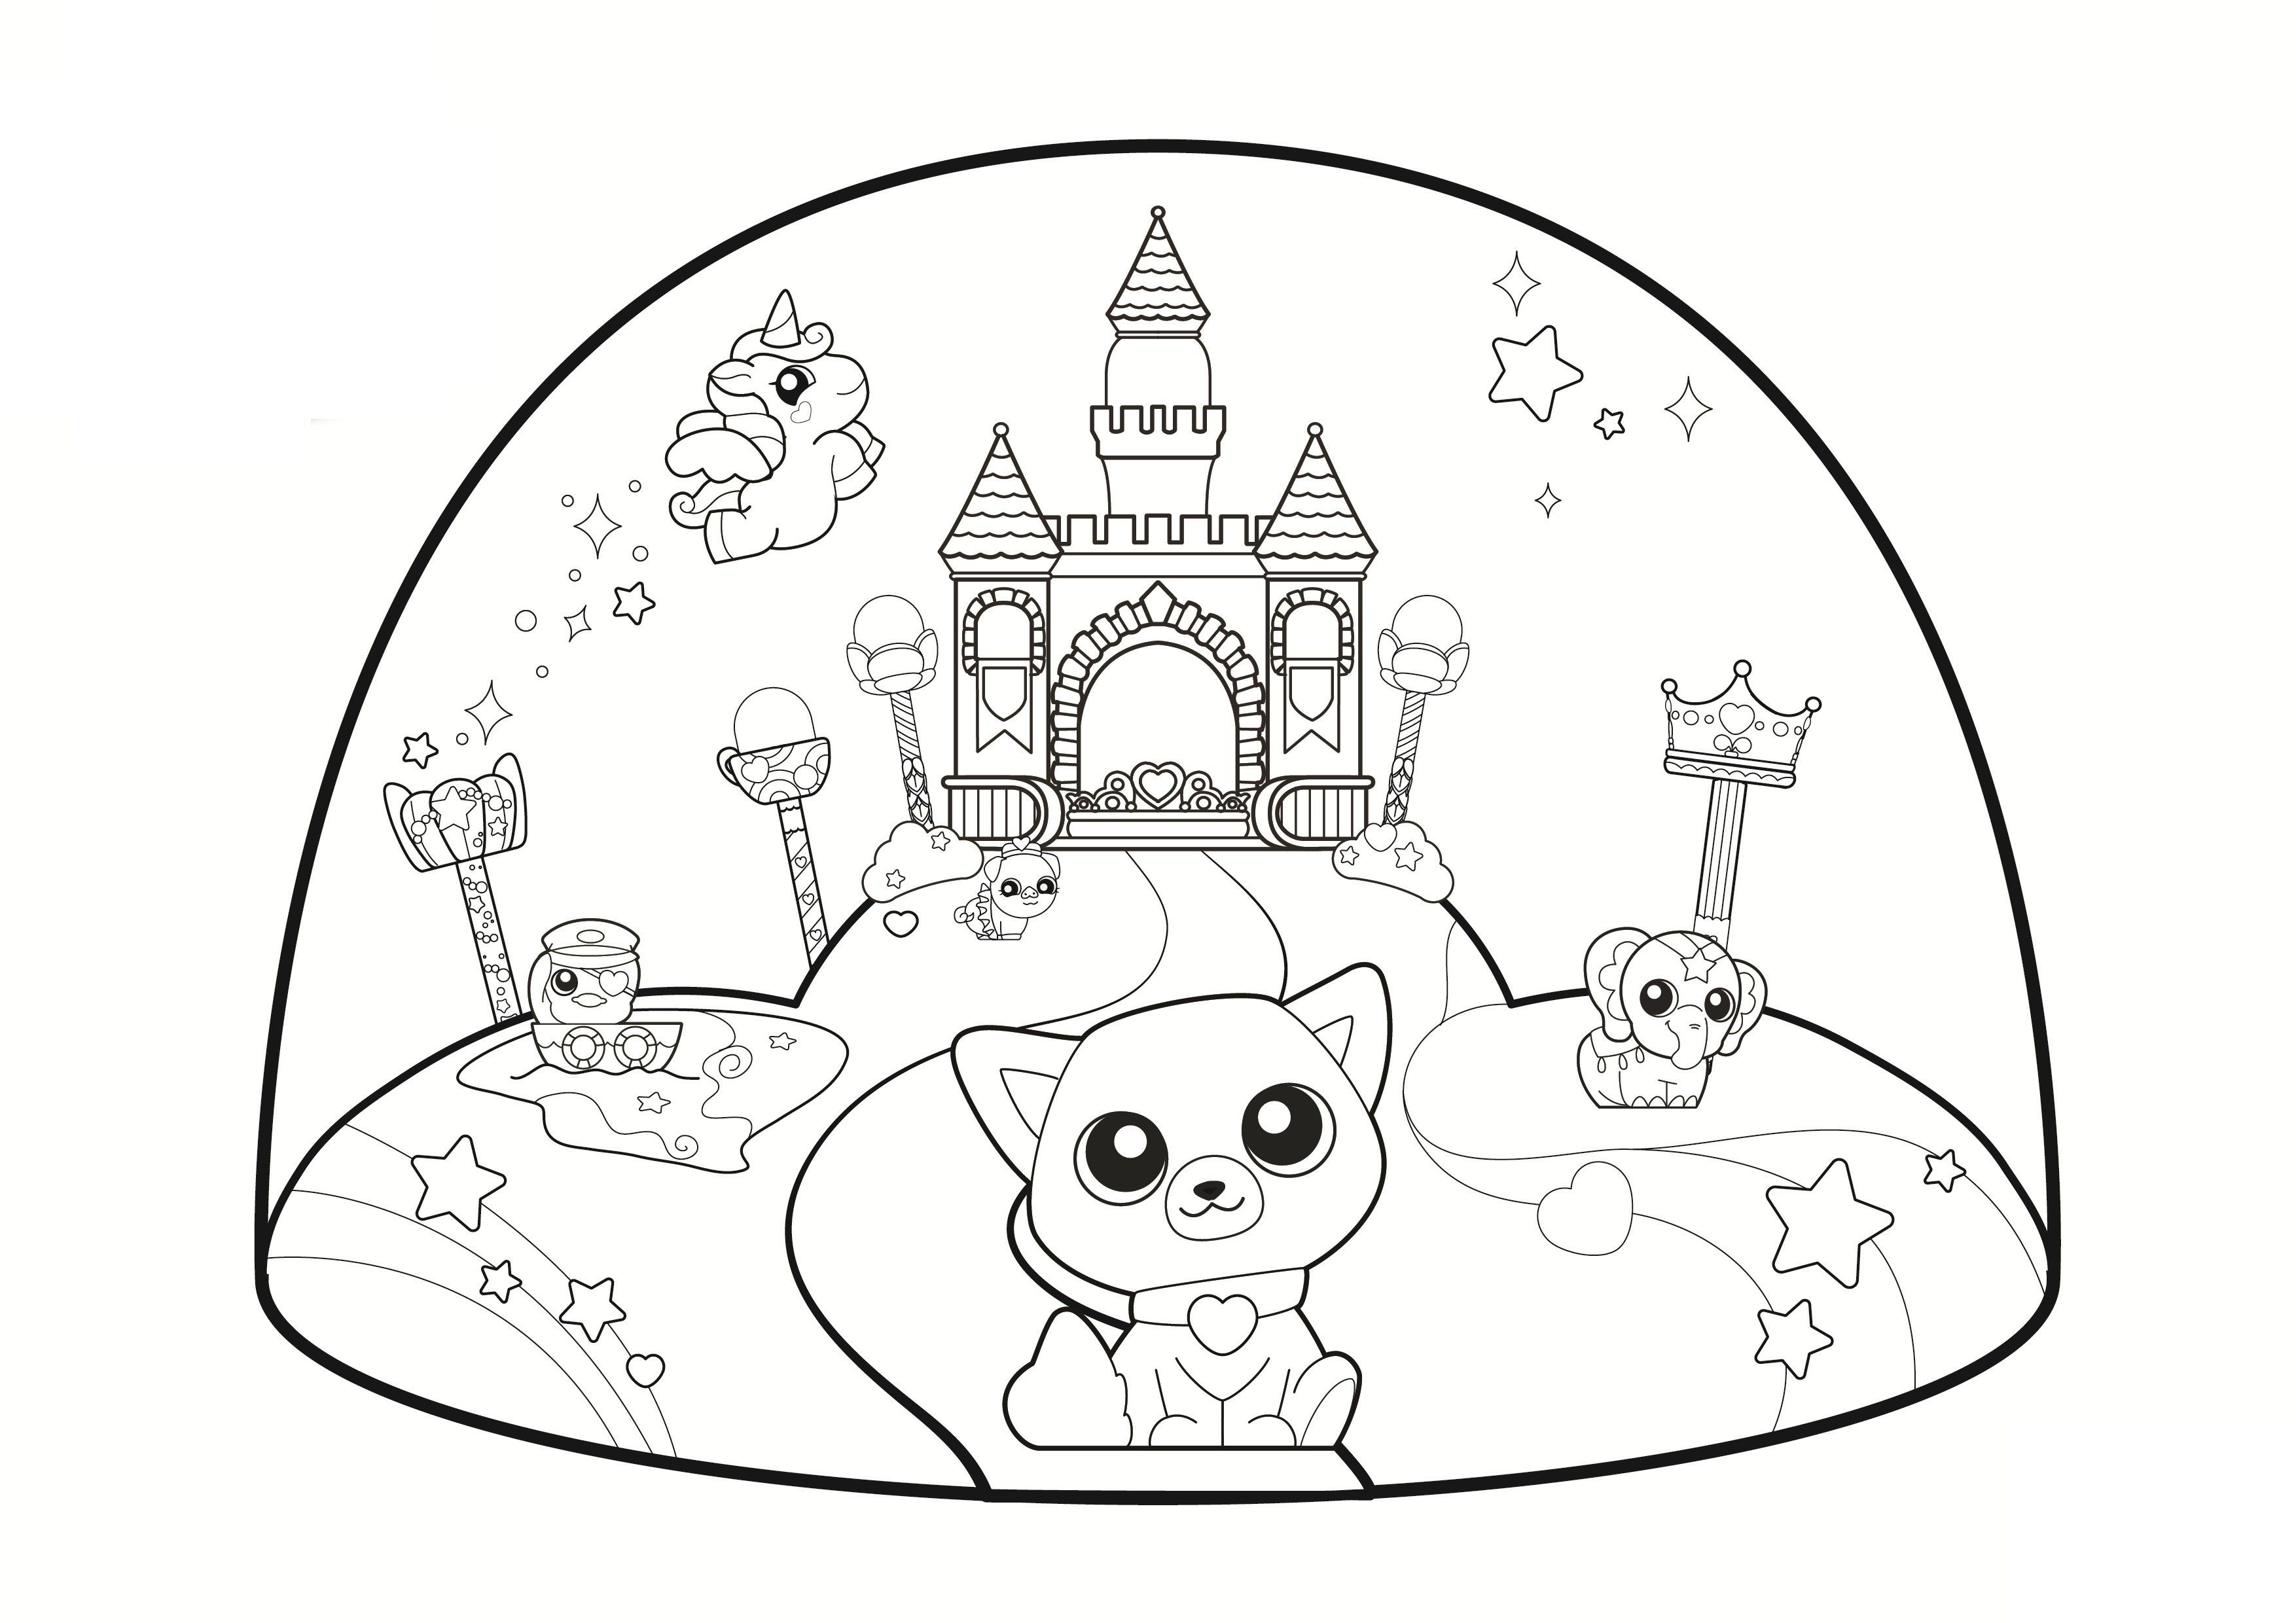 coloring-pages-shopkins-4.jpg